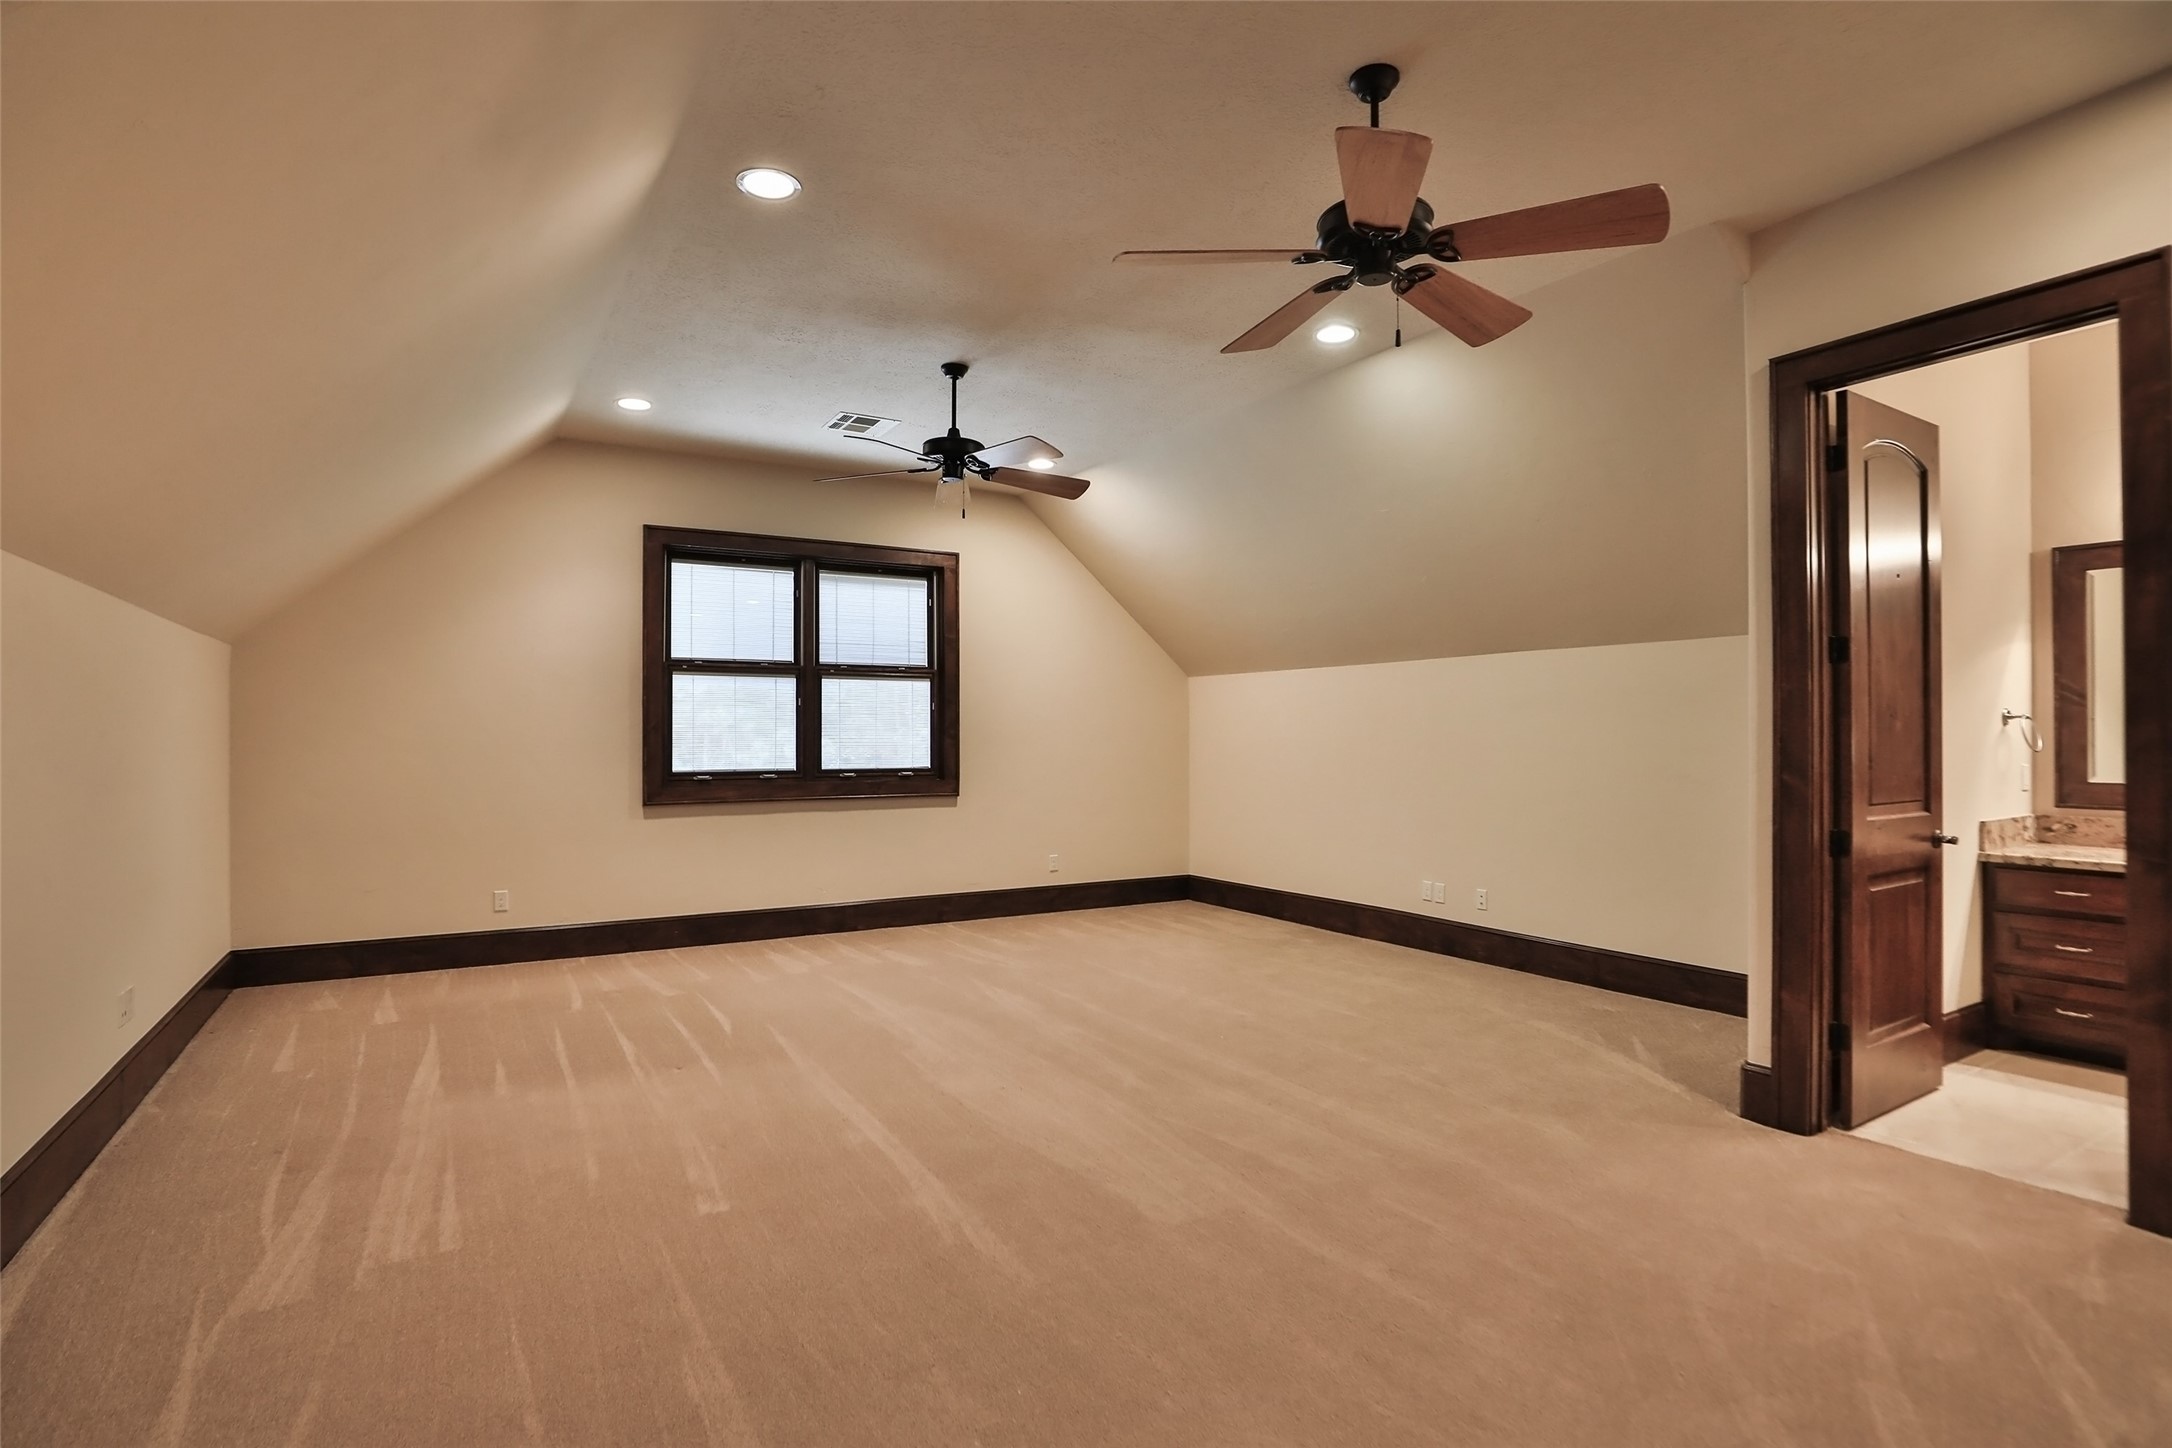 Another view of this versatile room to use as your family needs!